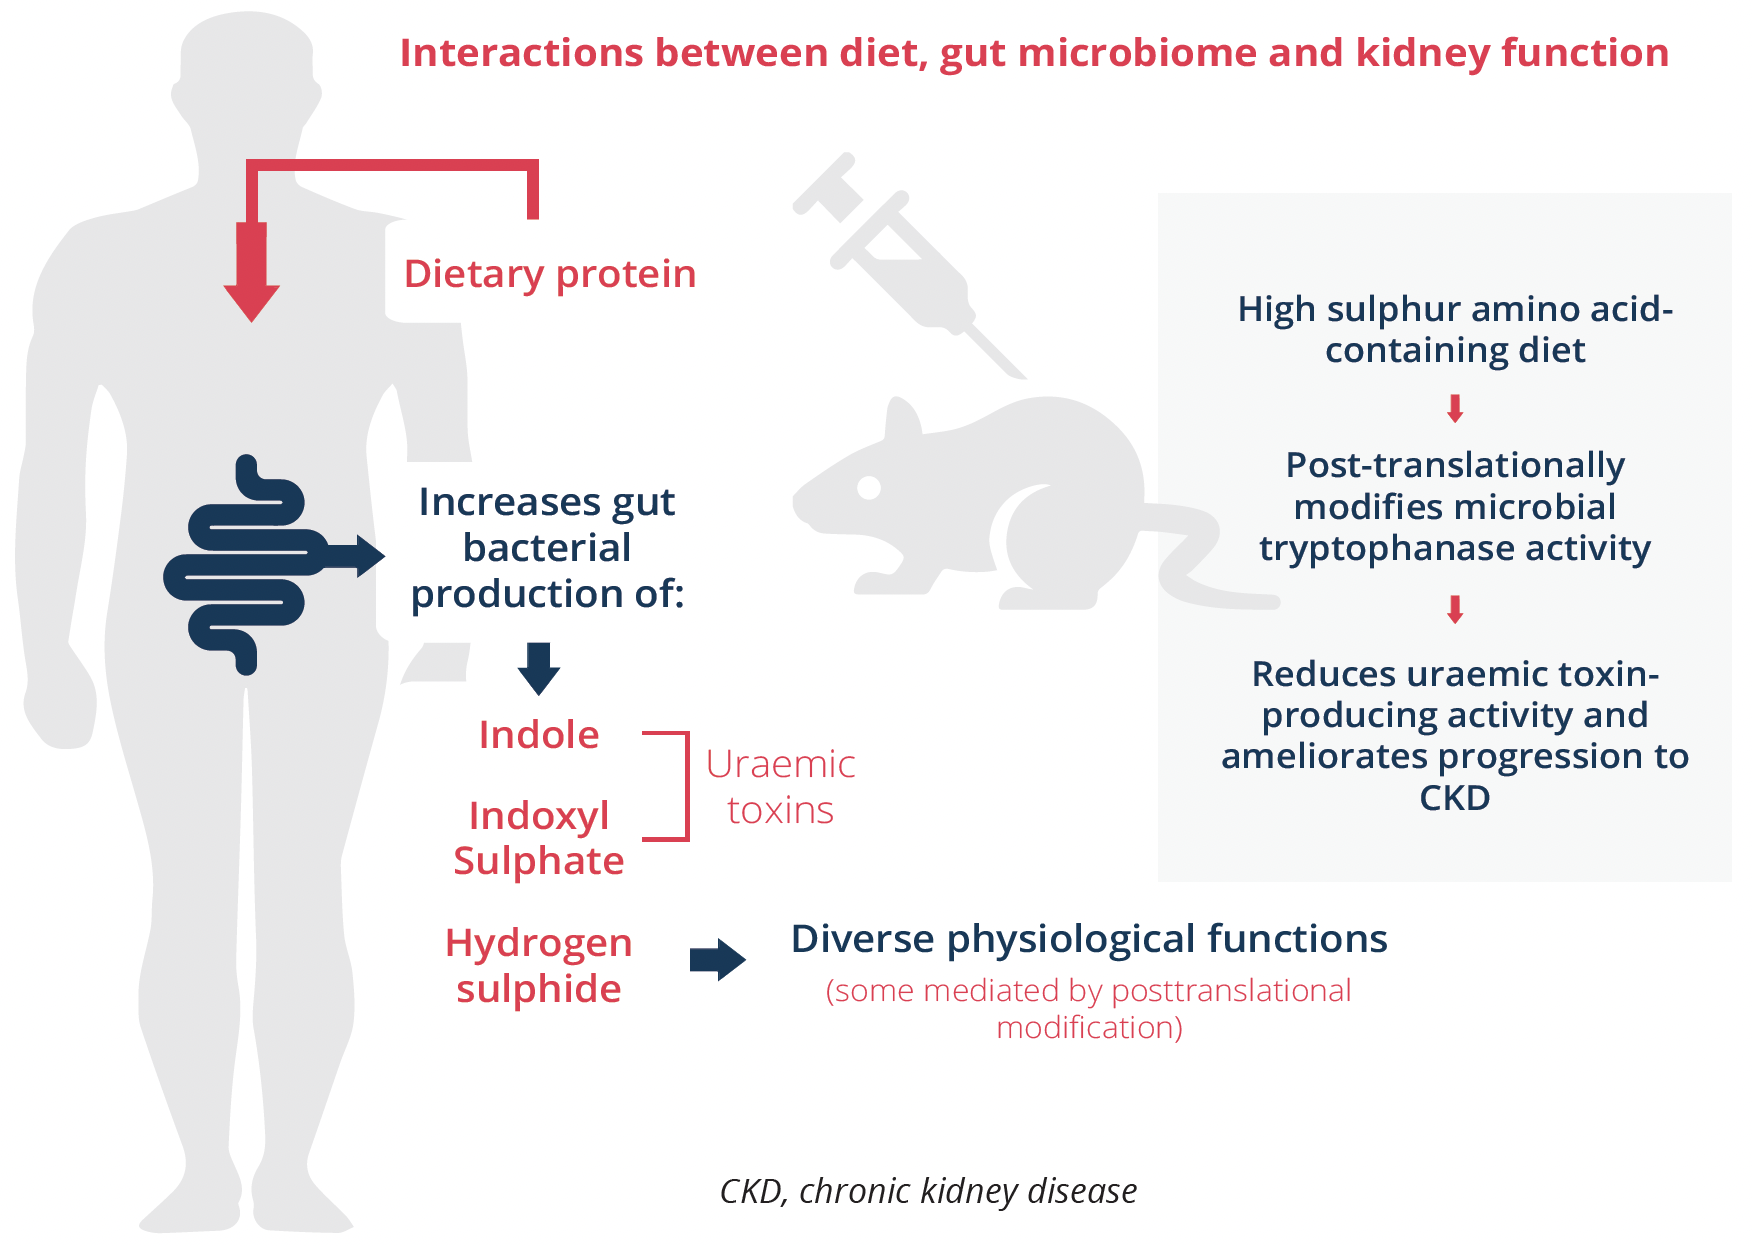 Complex interactions between diet, gut microbiome and kidney function